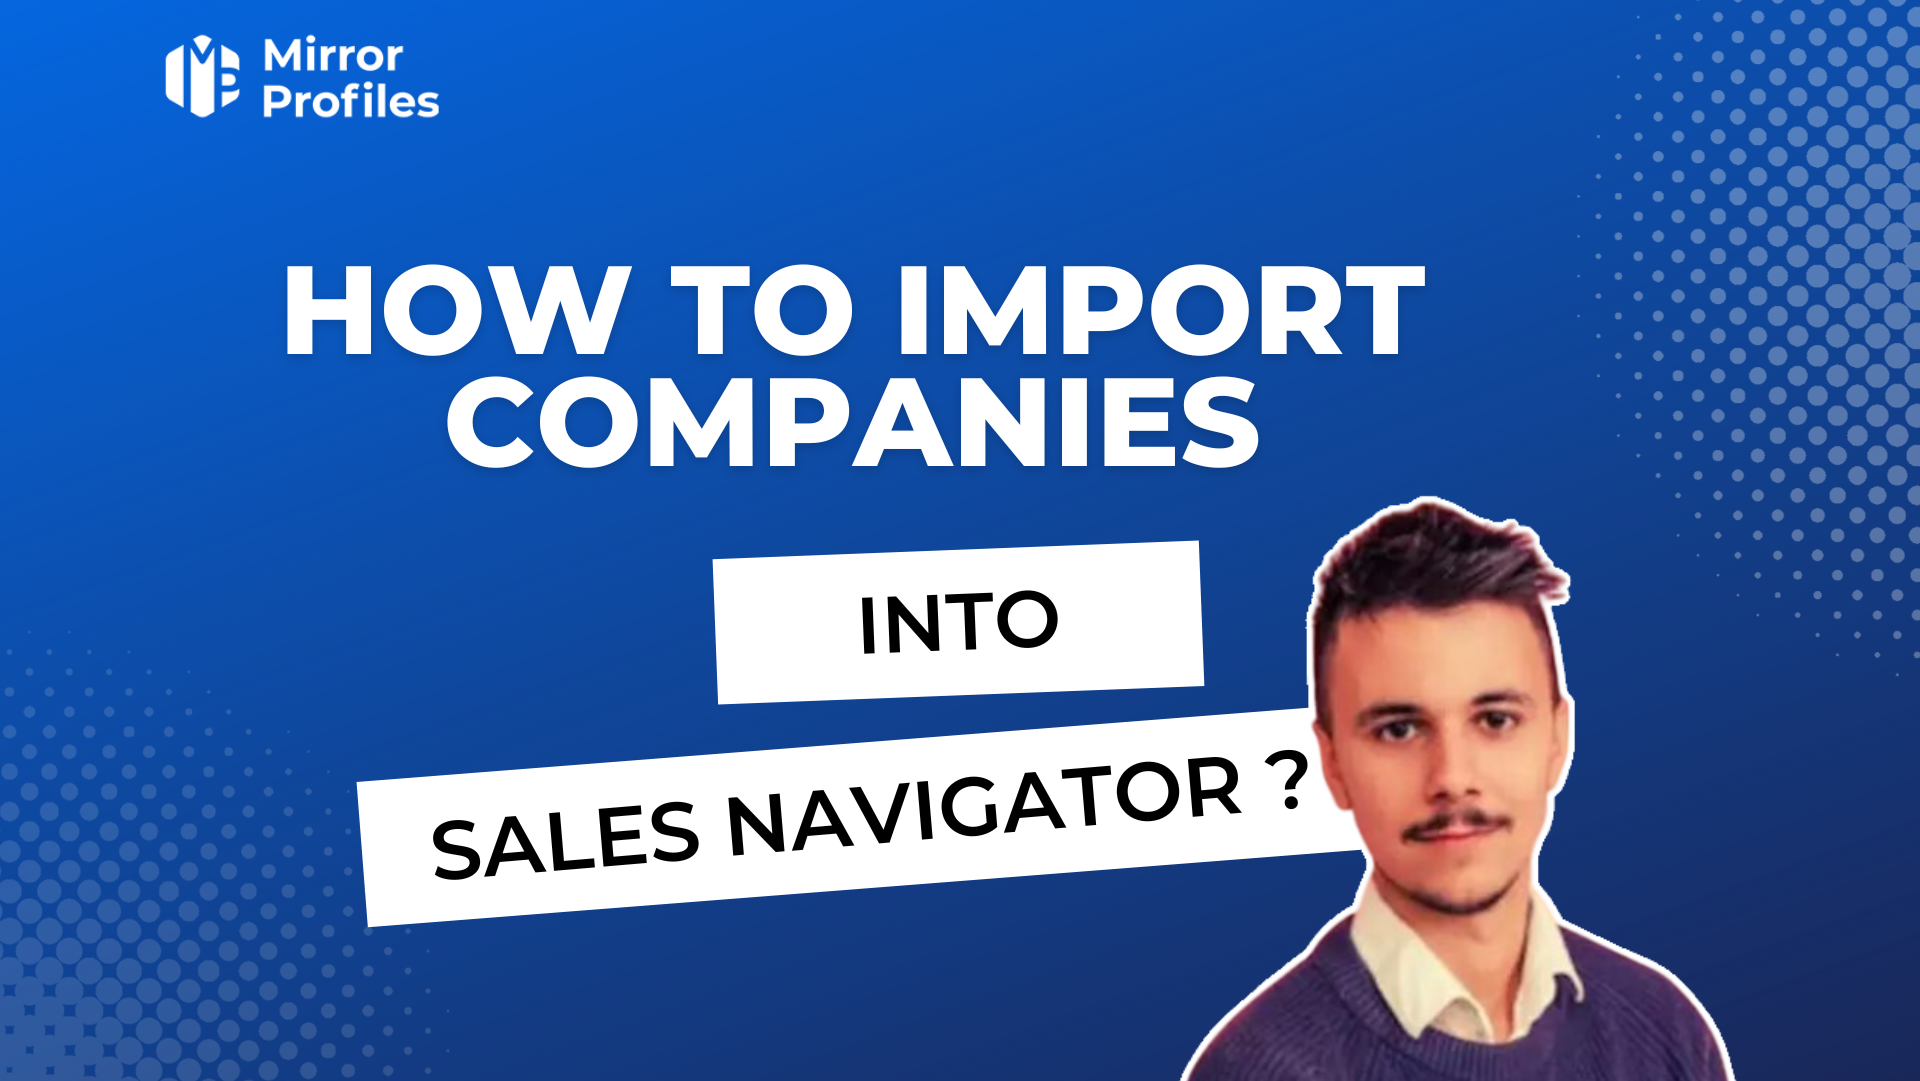 How to import companies into Sales Navigator?